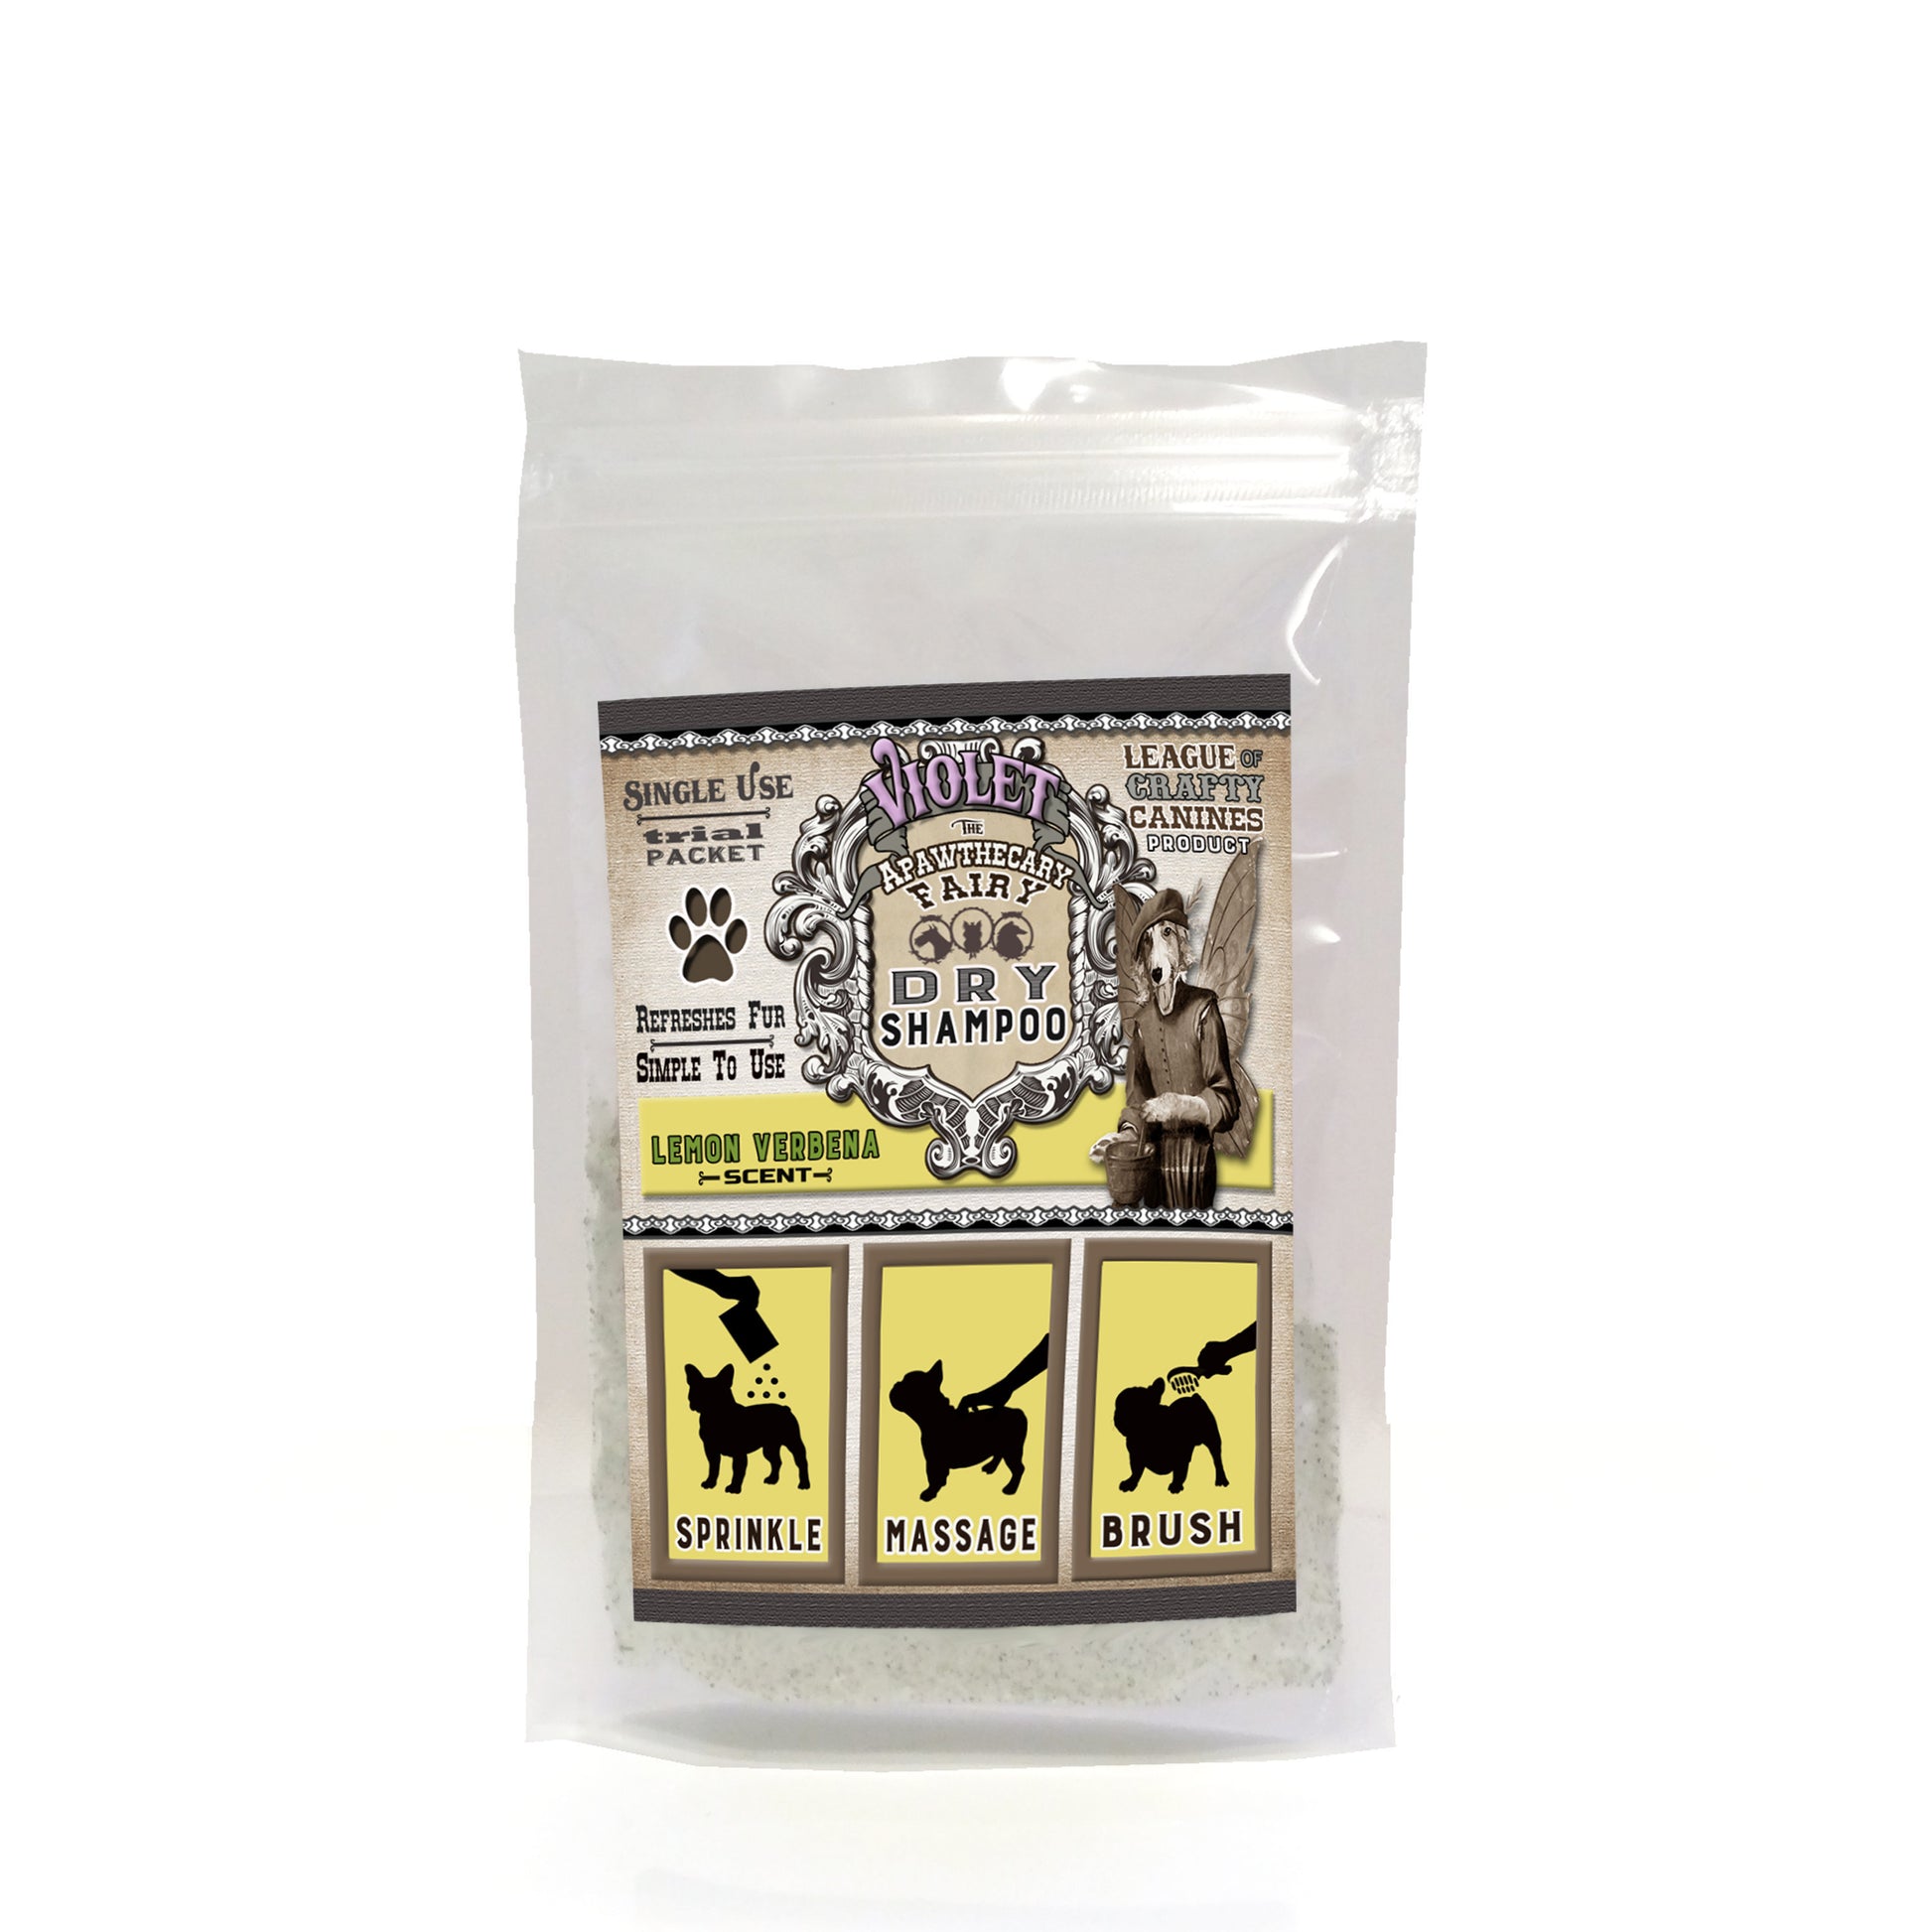 Violet the Apawthecary Fairy : (Lemon Verbena Scented) Dry Shampoo For Dogs! Trial Size - LEAGUE OF CRAFTY CANINES